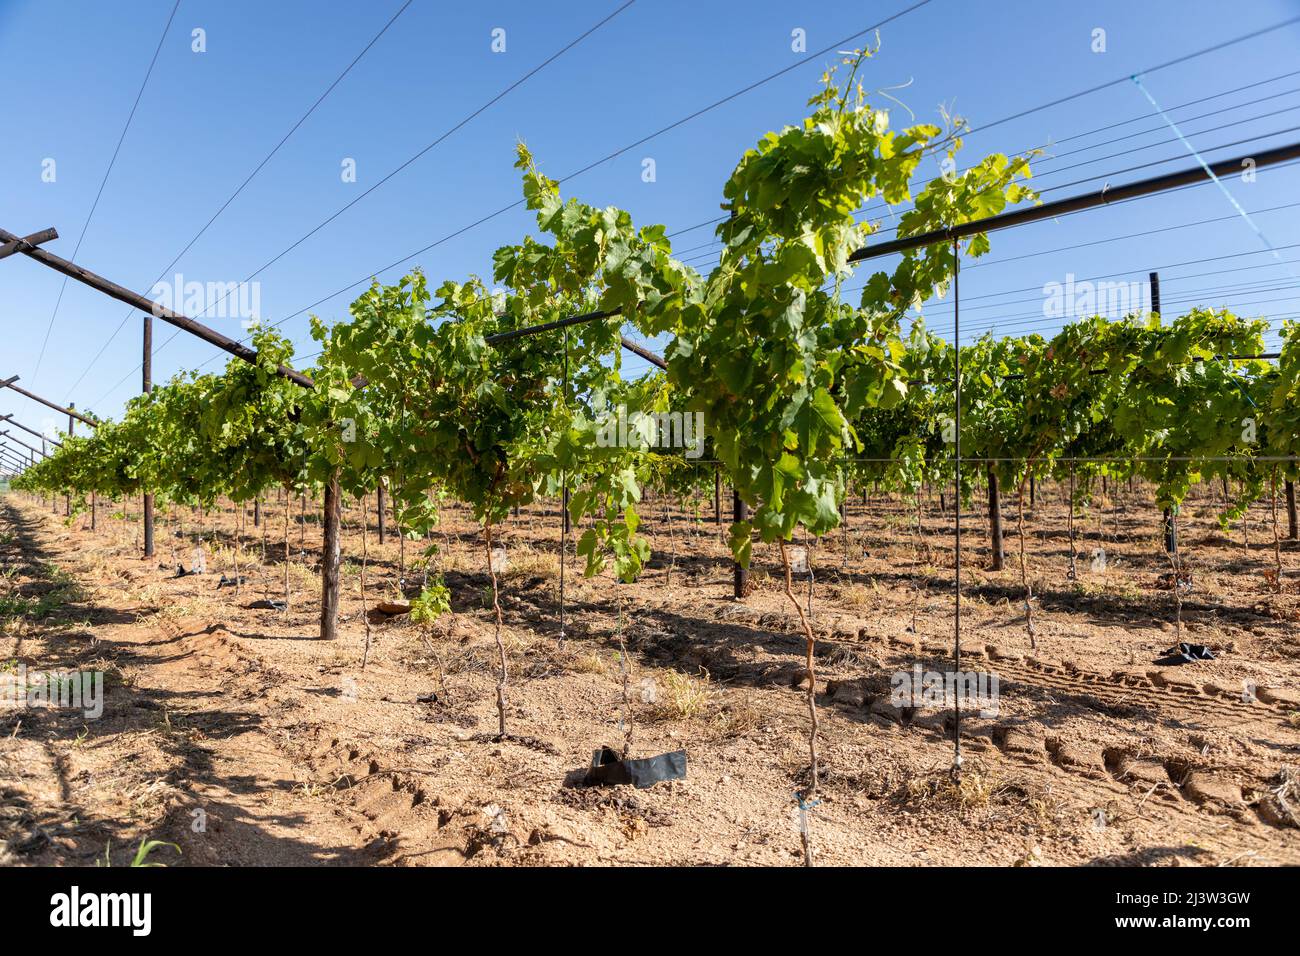 Selected focus on newly planted grape vines in the vineyard Stock Photo